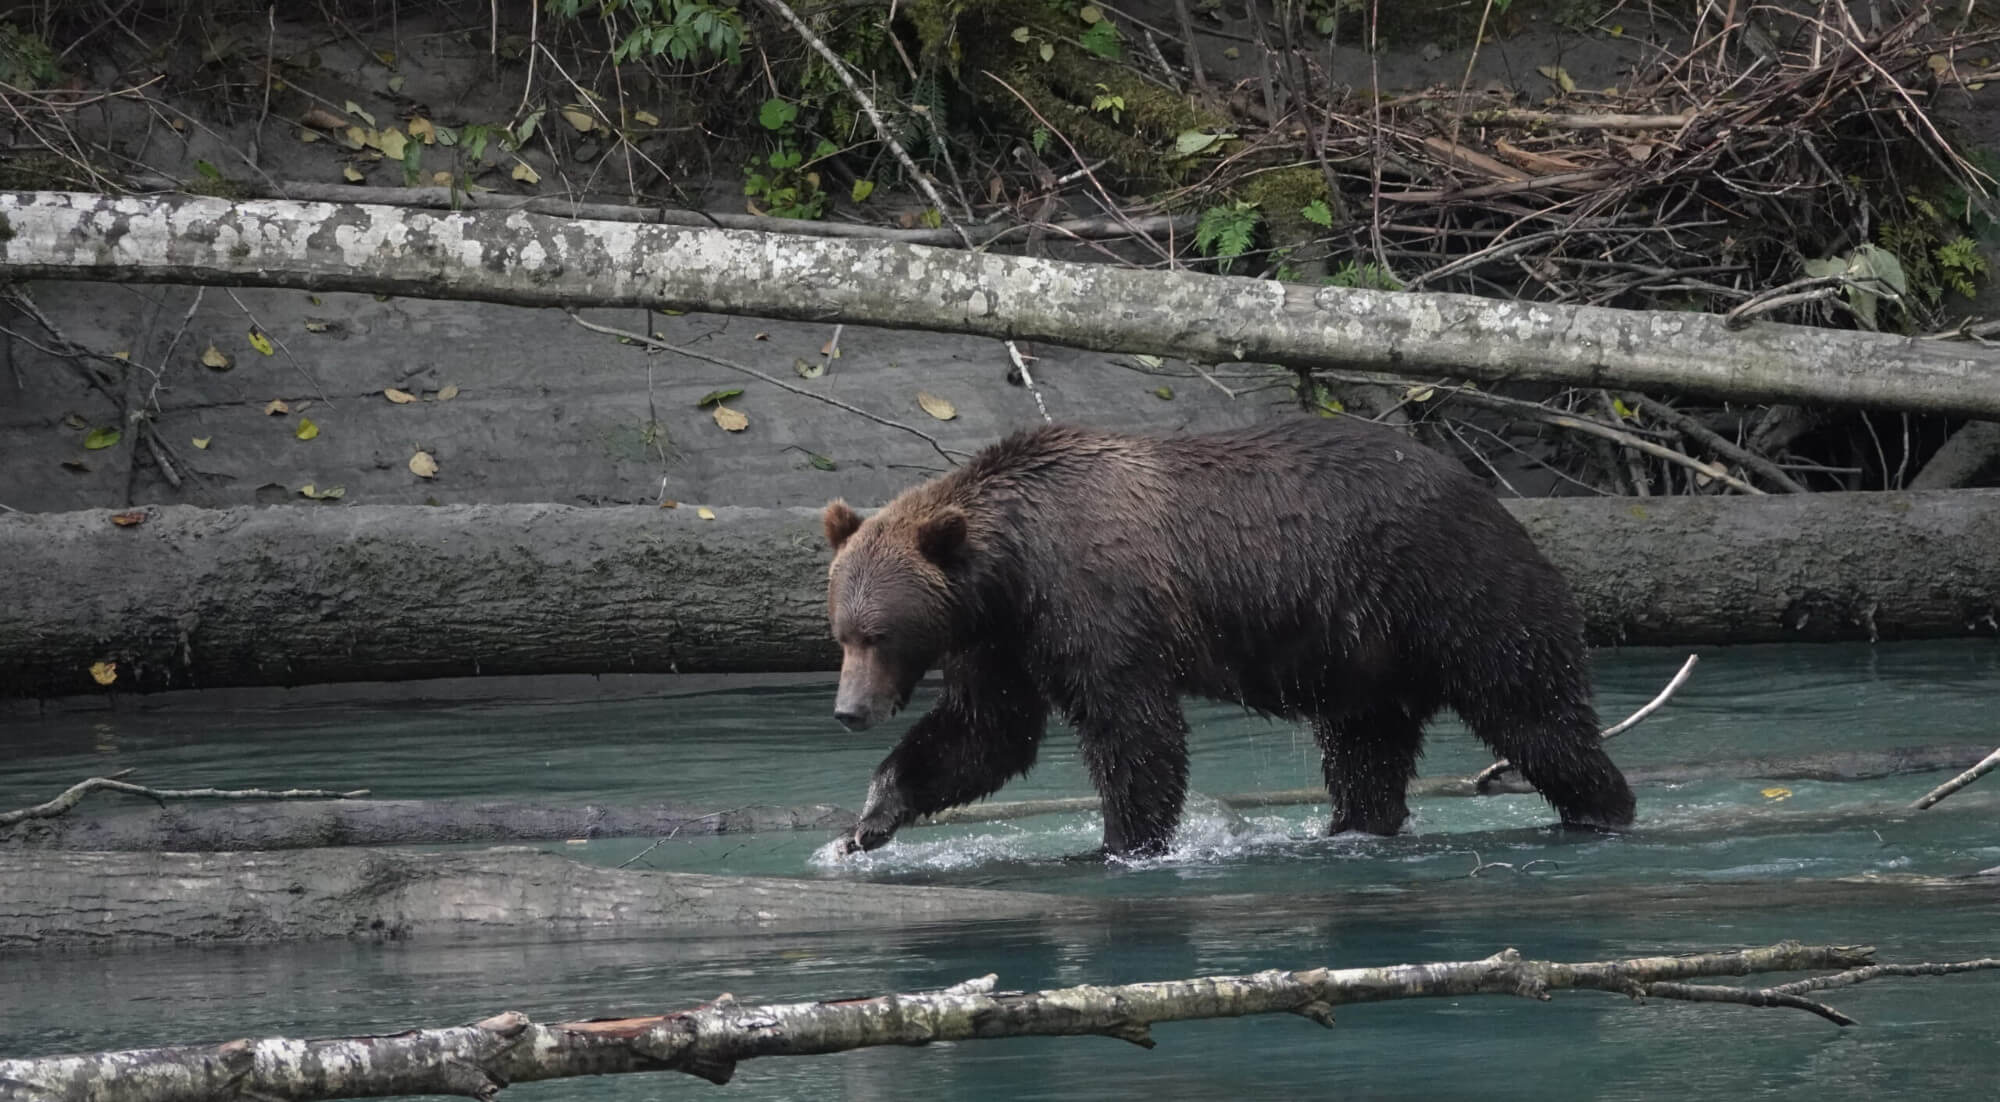 Grizzly Bear walking in shallow water between fallen trees and branches